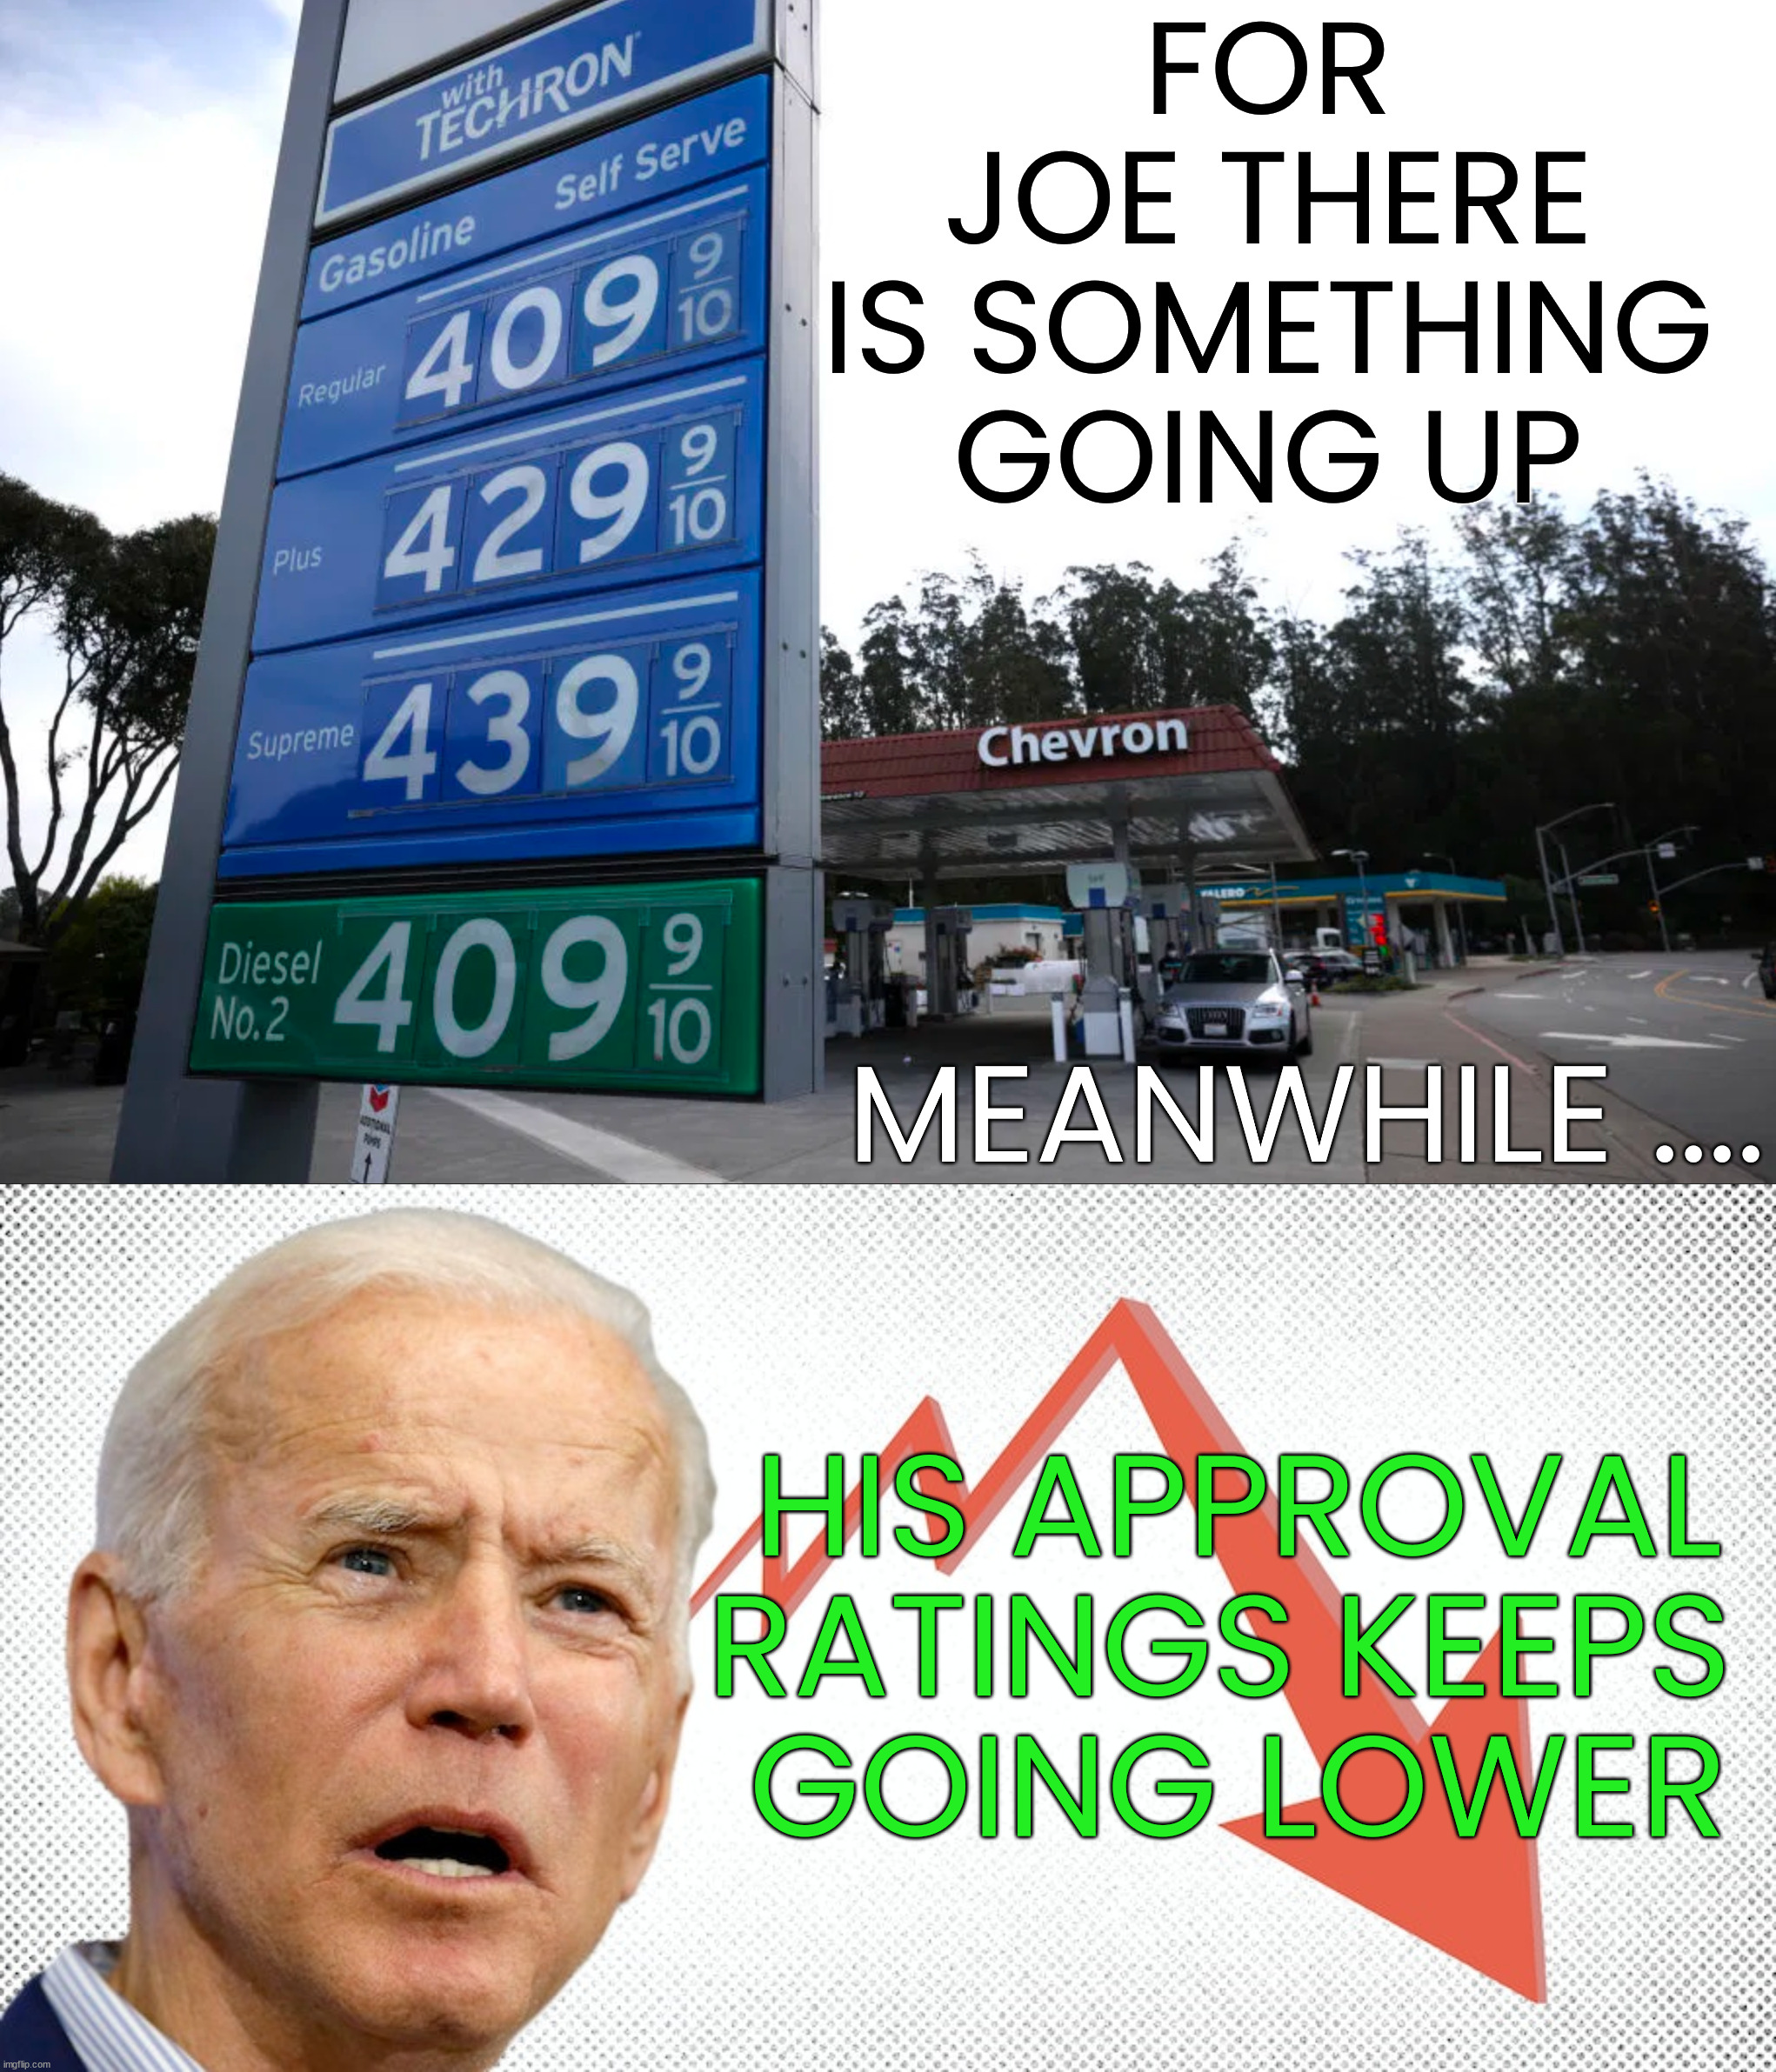 FOR JOE THERE IS SOMETHING GOING UP MEANWHILE .... HIS APPROVAL
RATINGS KEEPS 
GOING LOWER | image tagged in gas prices,political meme | made w/ Imgflip meme maker